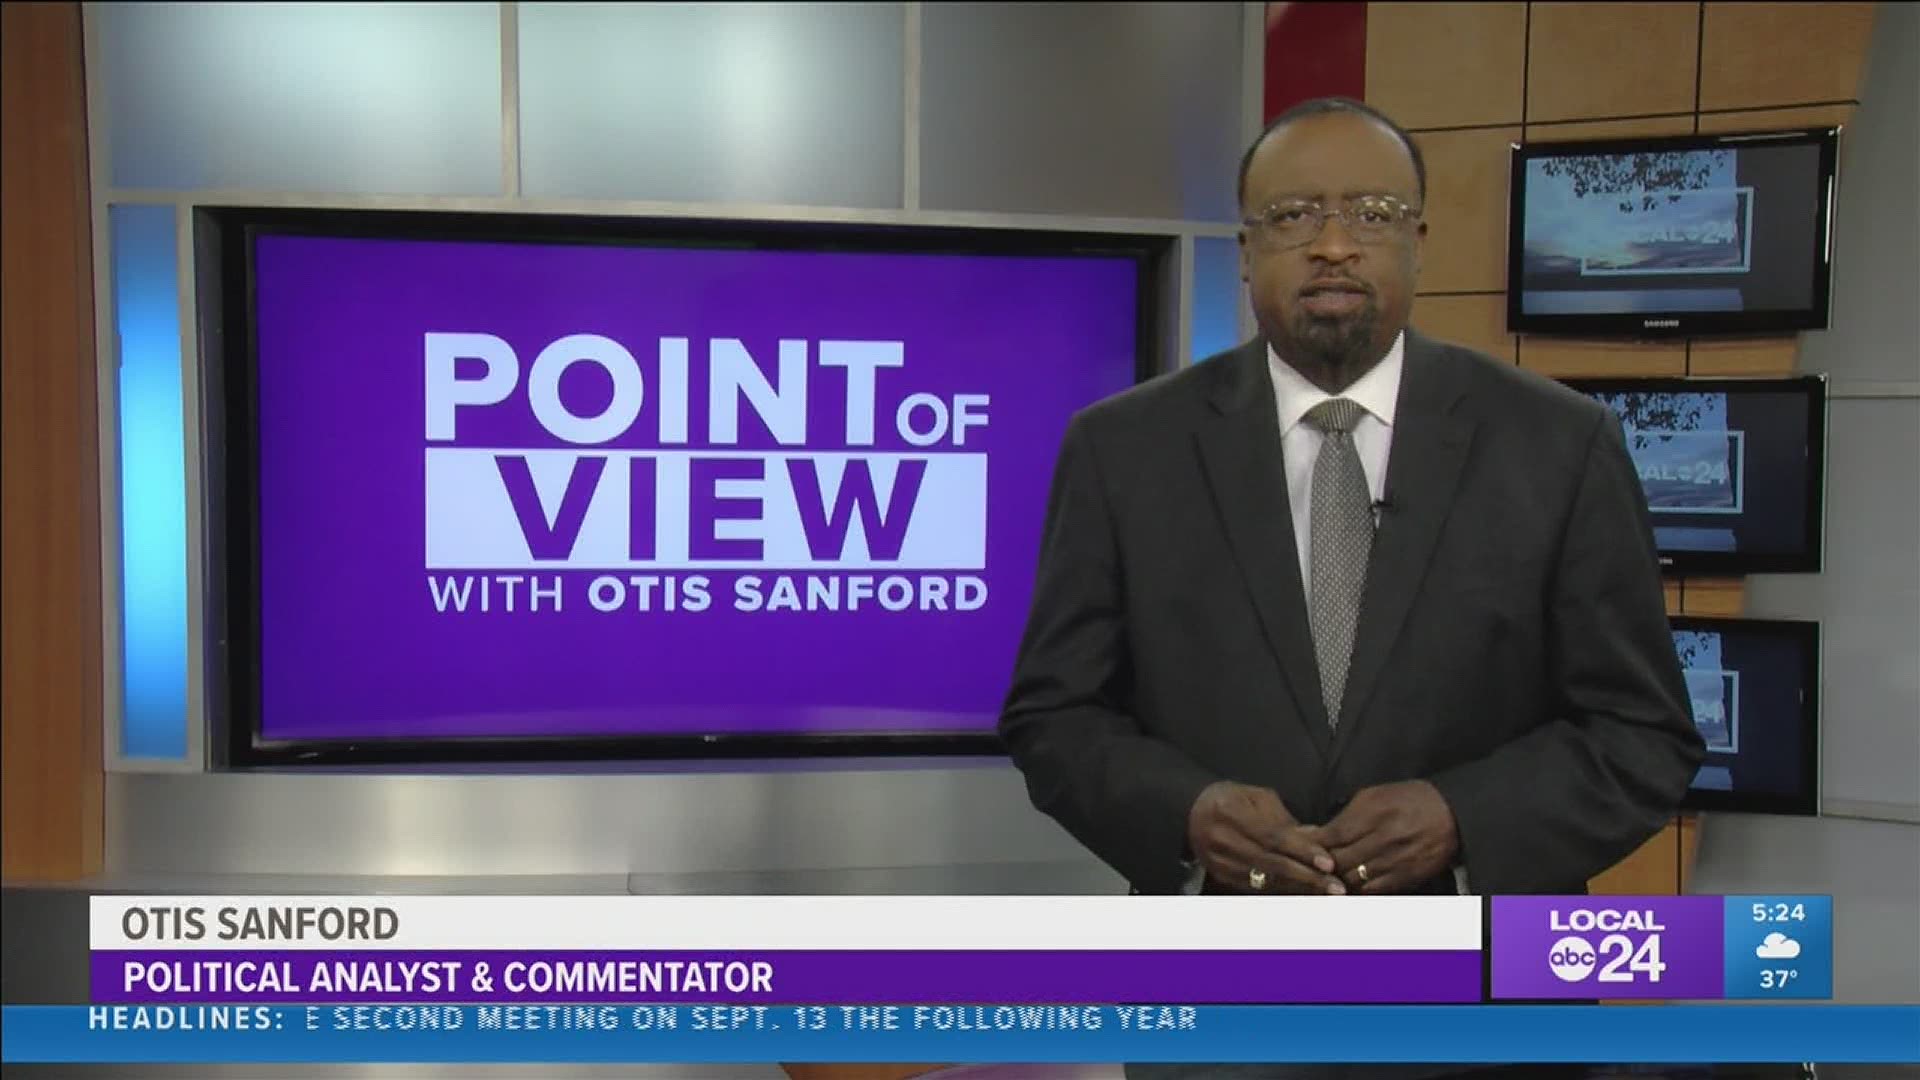 Local 24 News political analyst and commentator Otis Sanford shares his point of view on the right to protest.